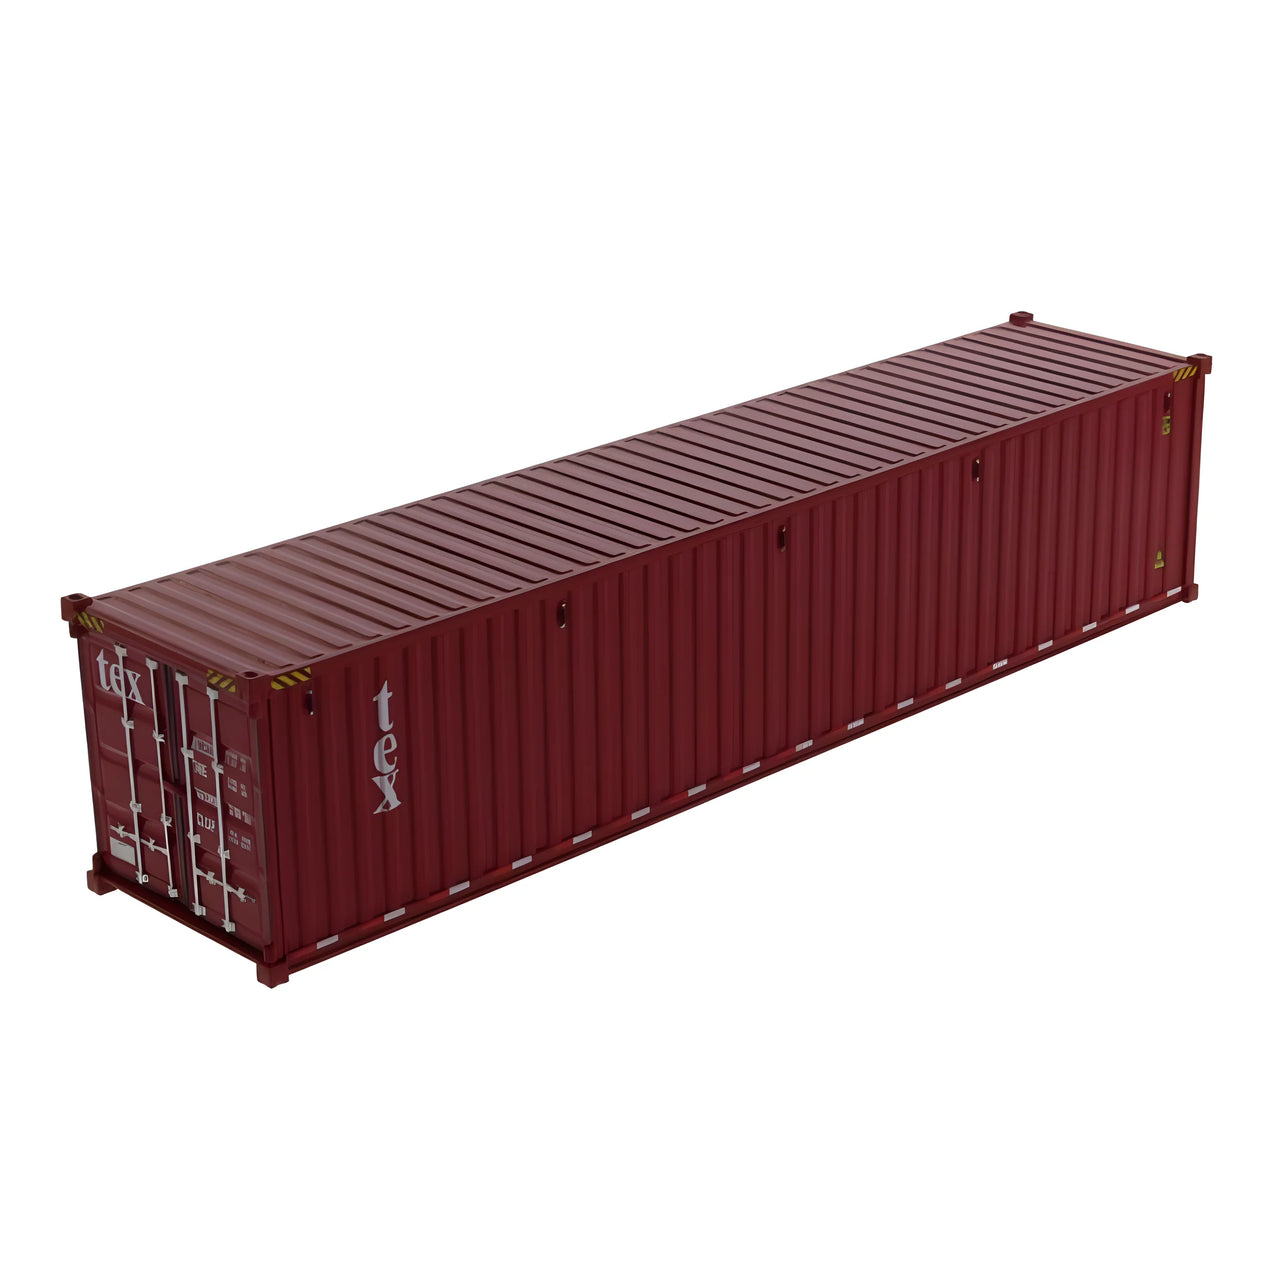 91027A 40' Dry Goods Sea Container 1:50 Scale